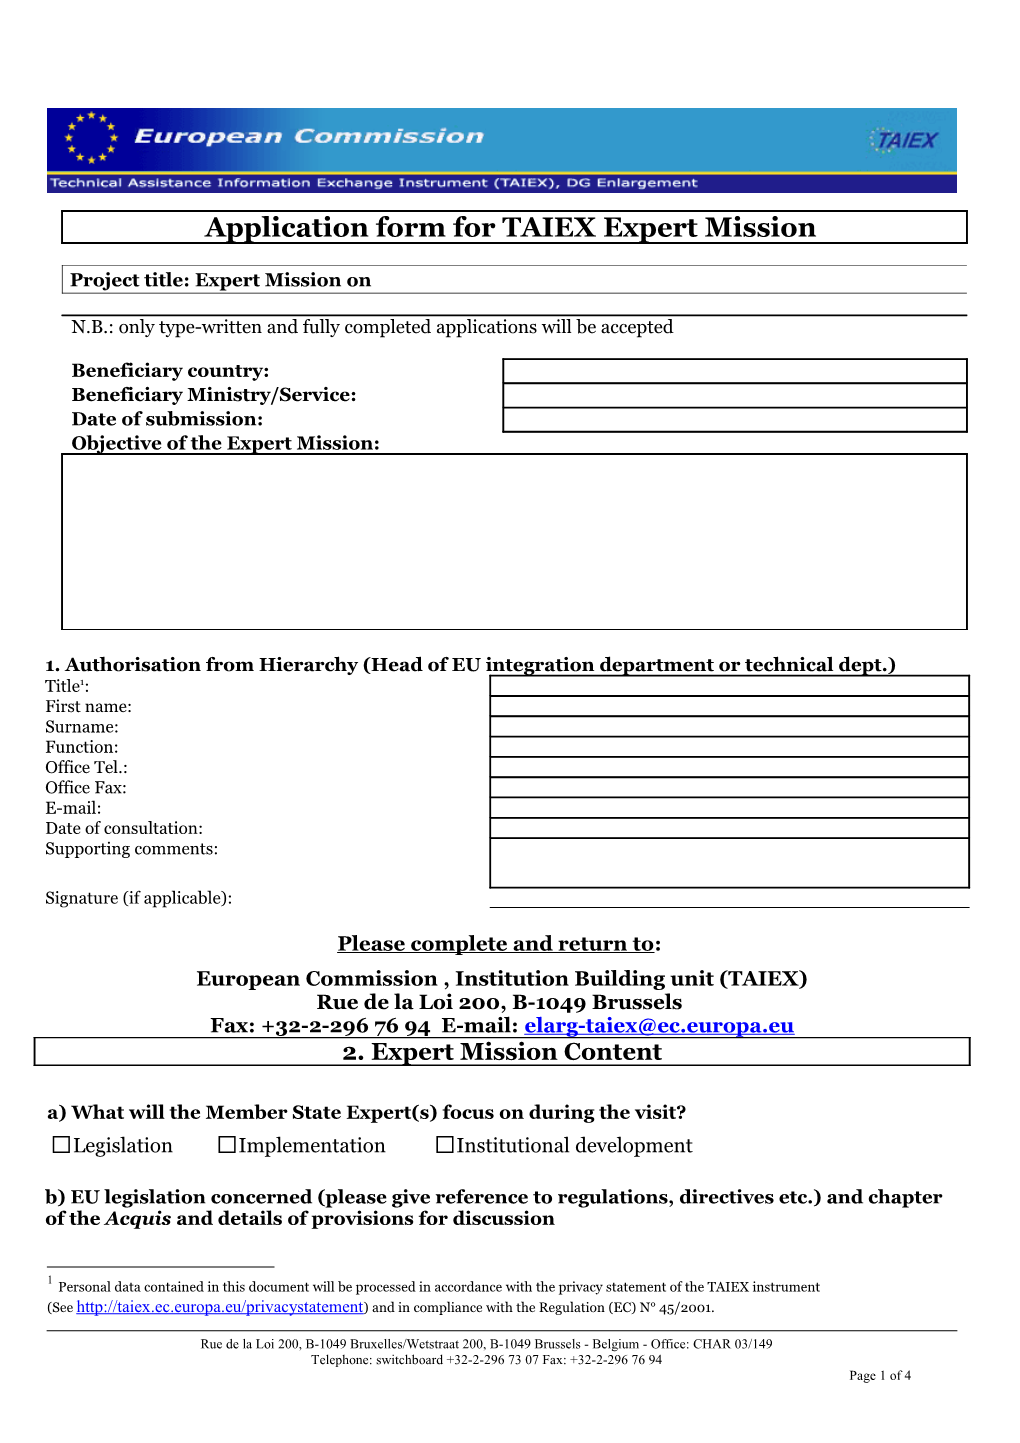 Application Form for TAIEX Expert Mission